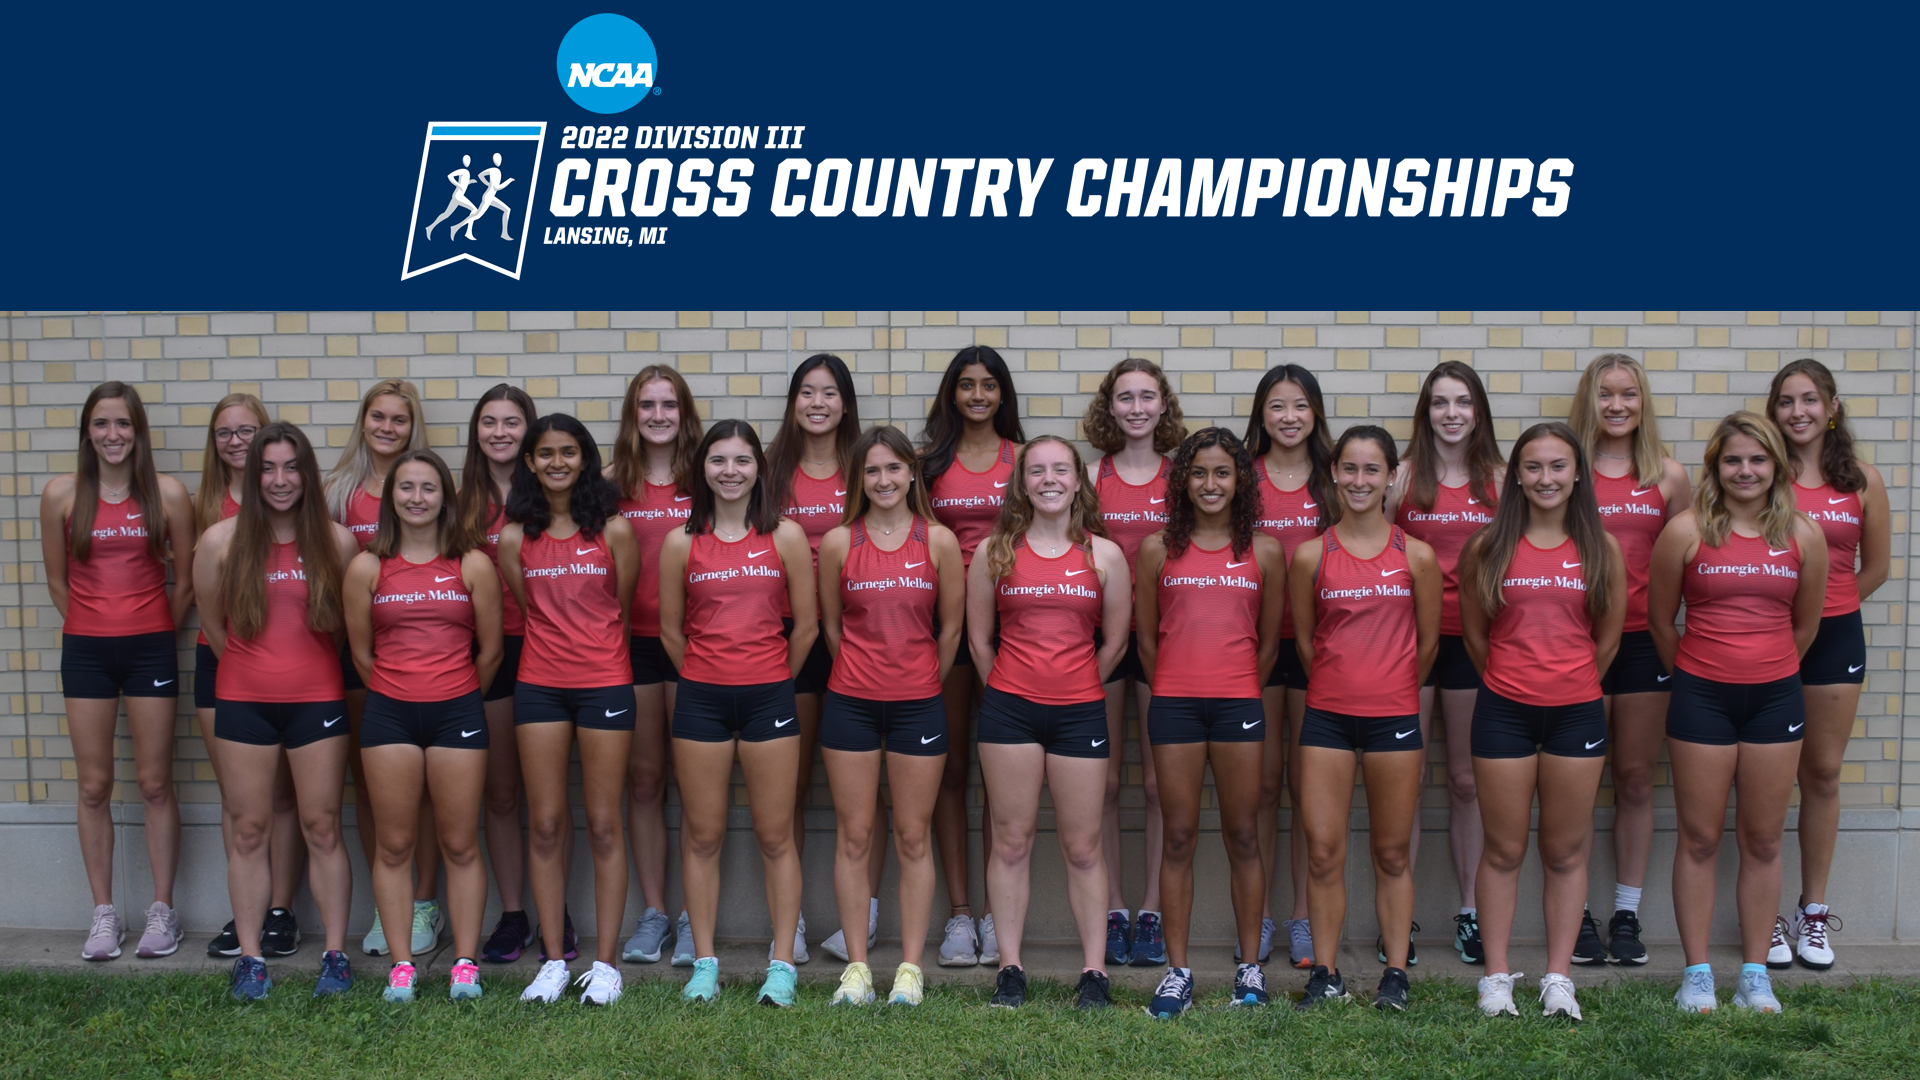 women's cross country team standing in two rows with NCAA Cross Country Championships logo